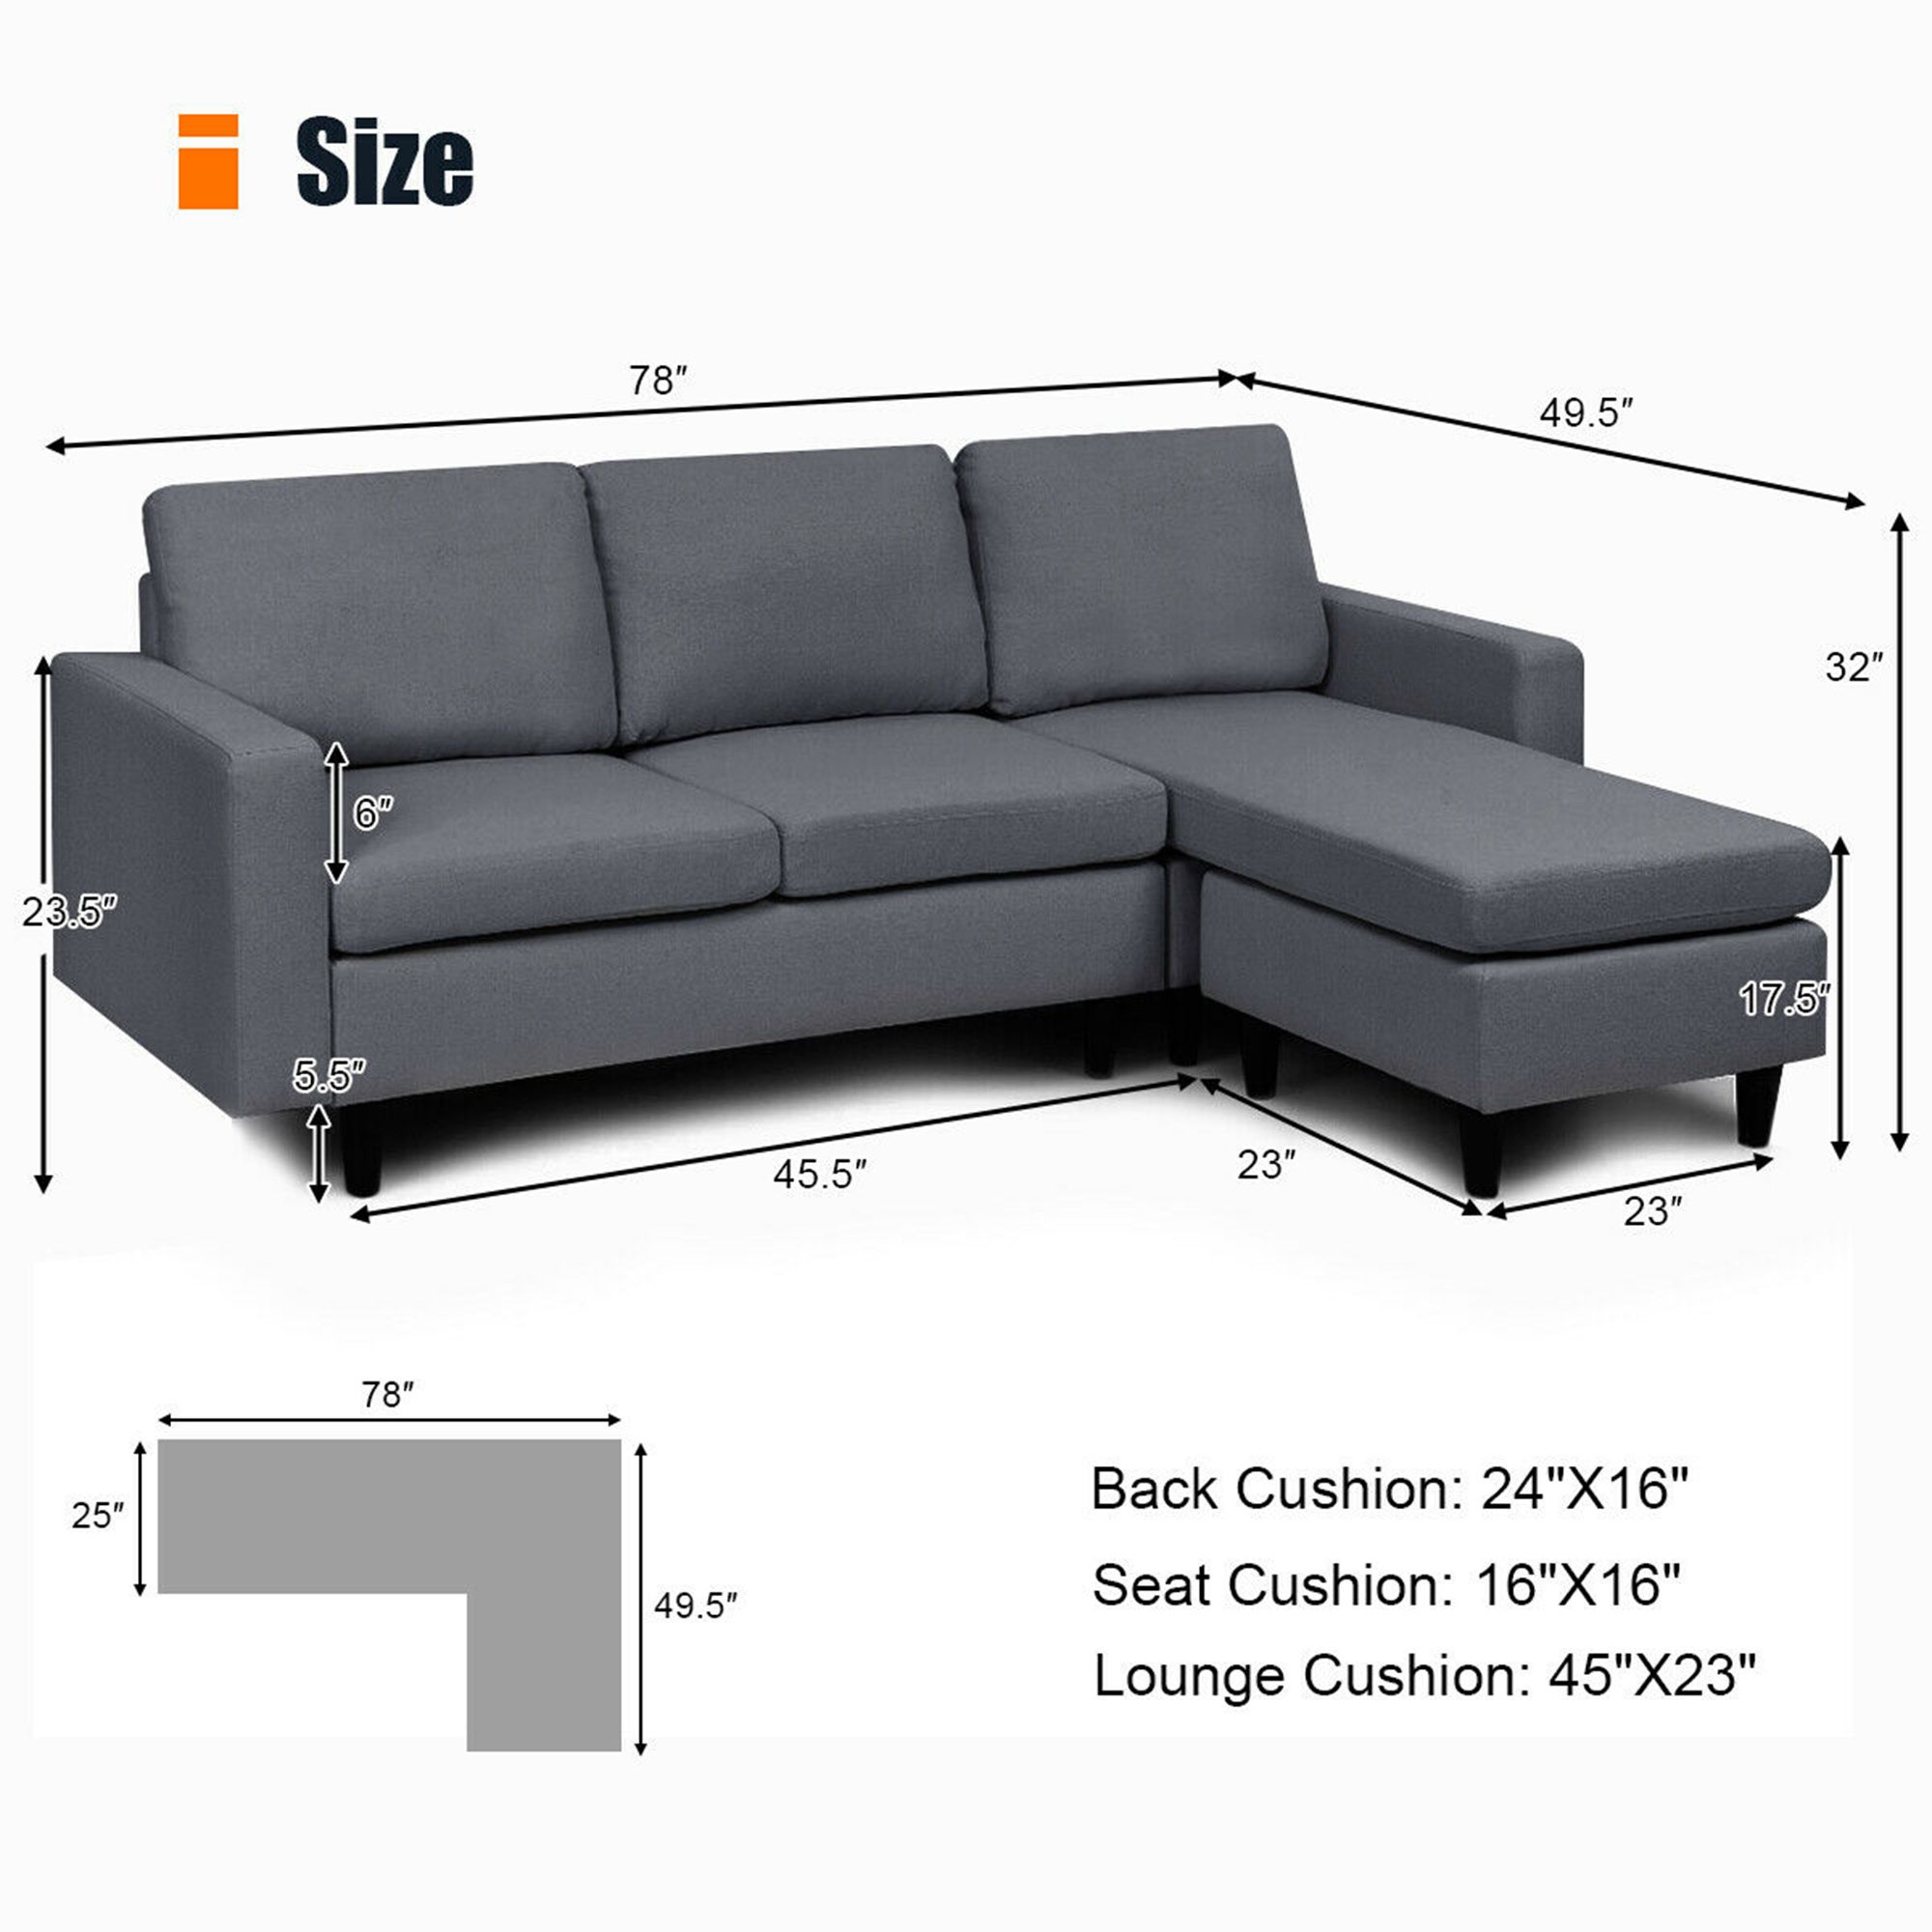 Convertible L Shaped Sectional Sofa Couch W/ Cushion Dark Gray | Ebay For Convertible L Shaped Sectional Sofas (View 15 of 20)